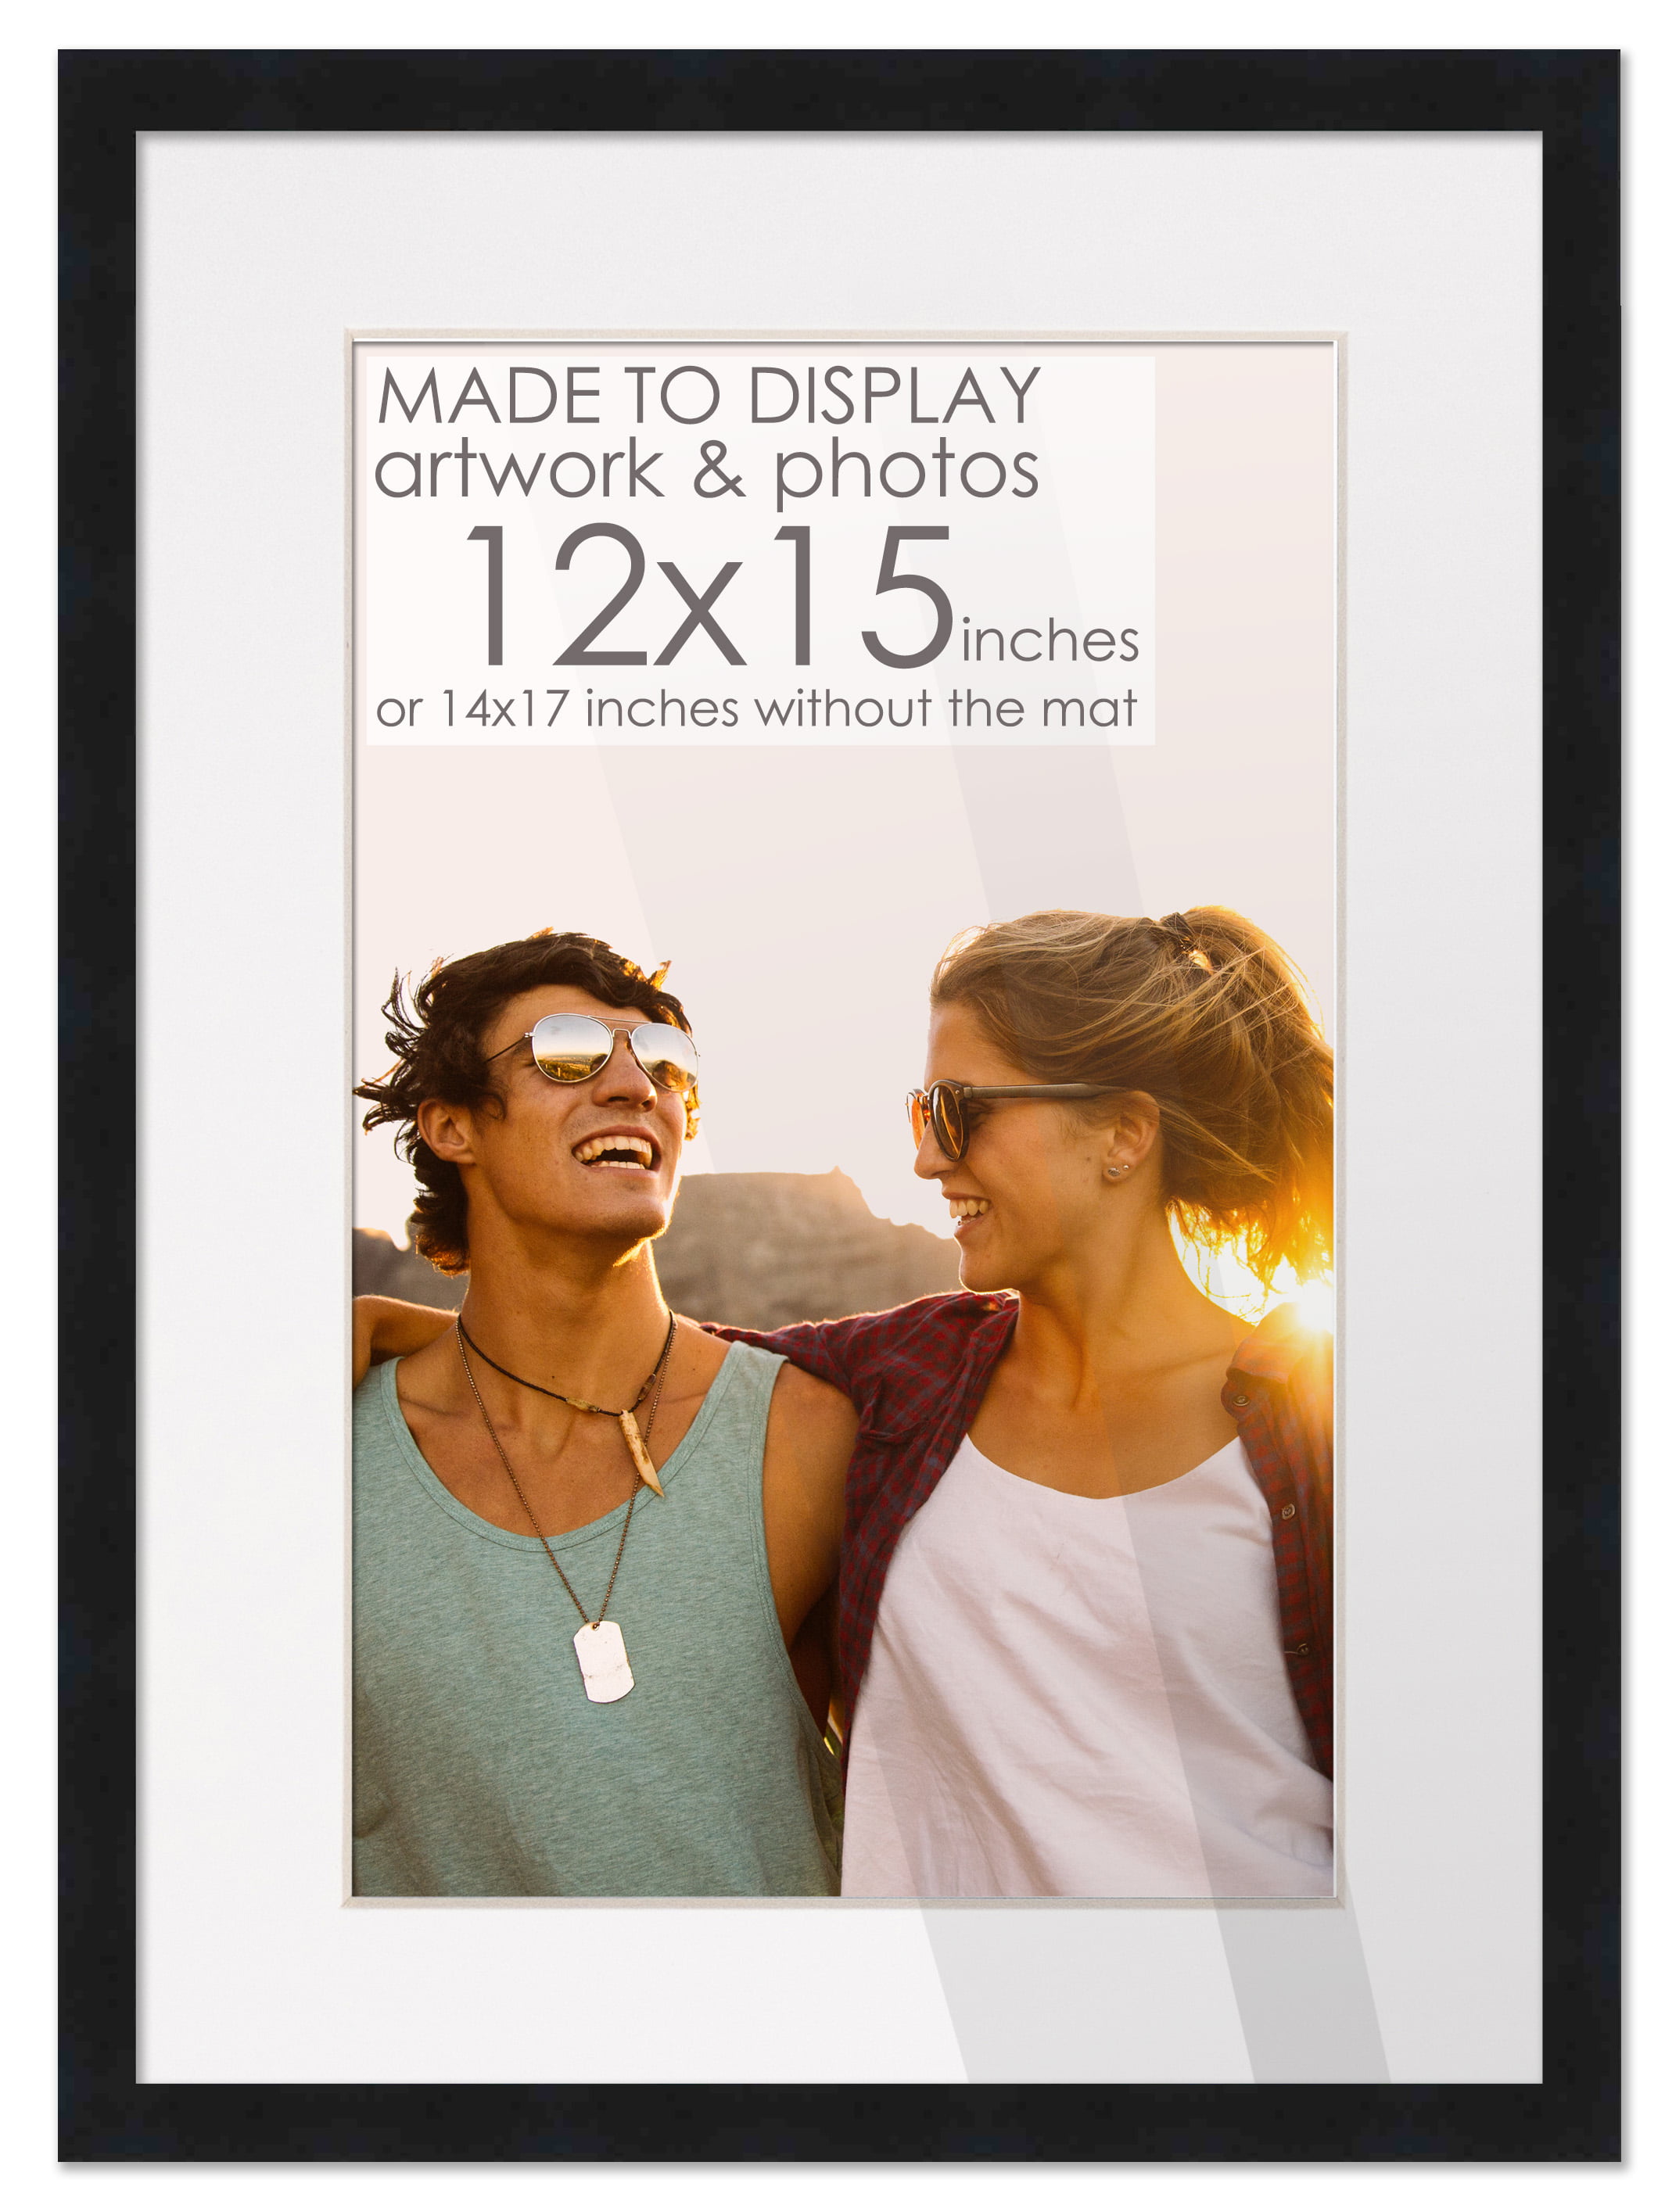 11 x 14 Poster Frame: Black, 14.25 x 17.25 inches - Creative Minds